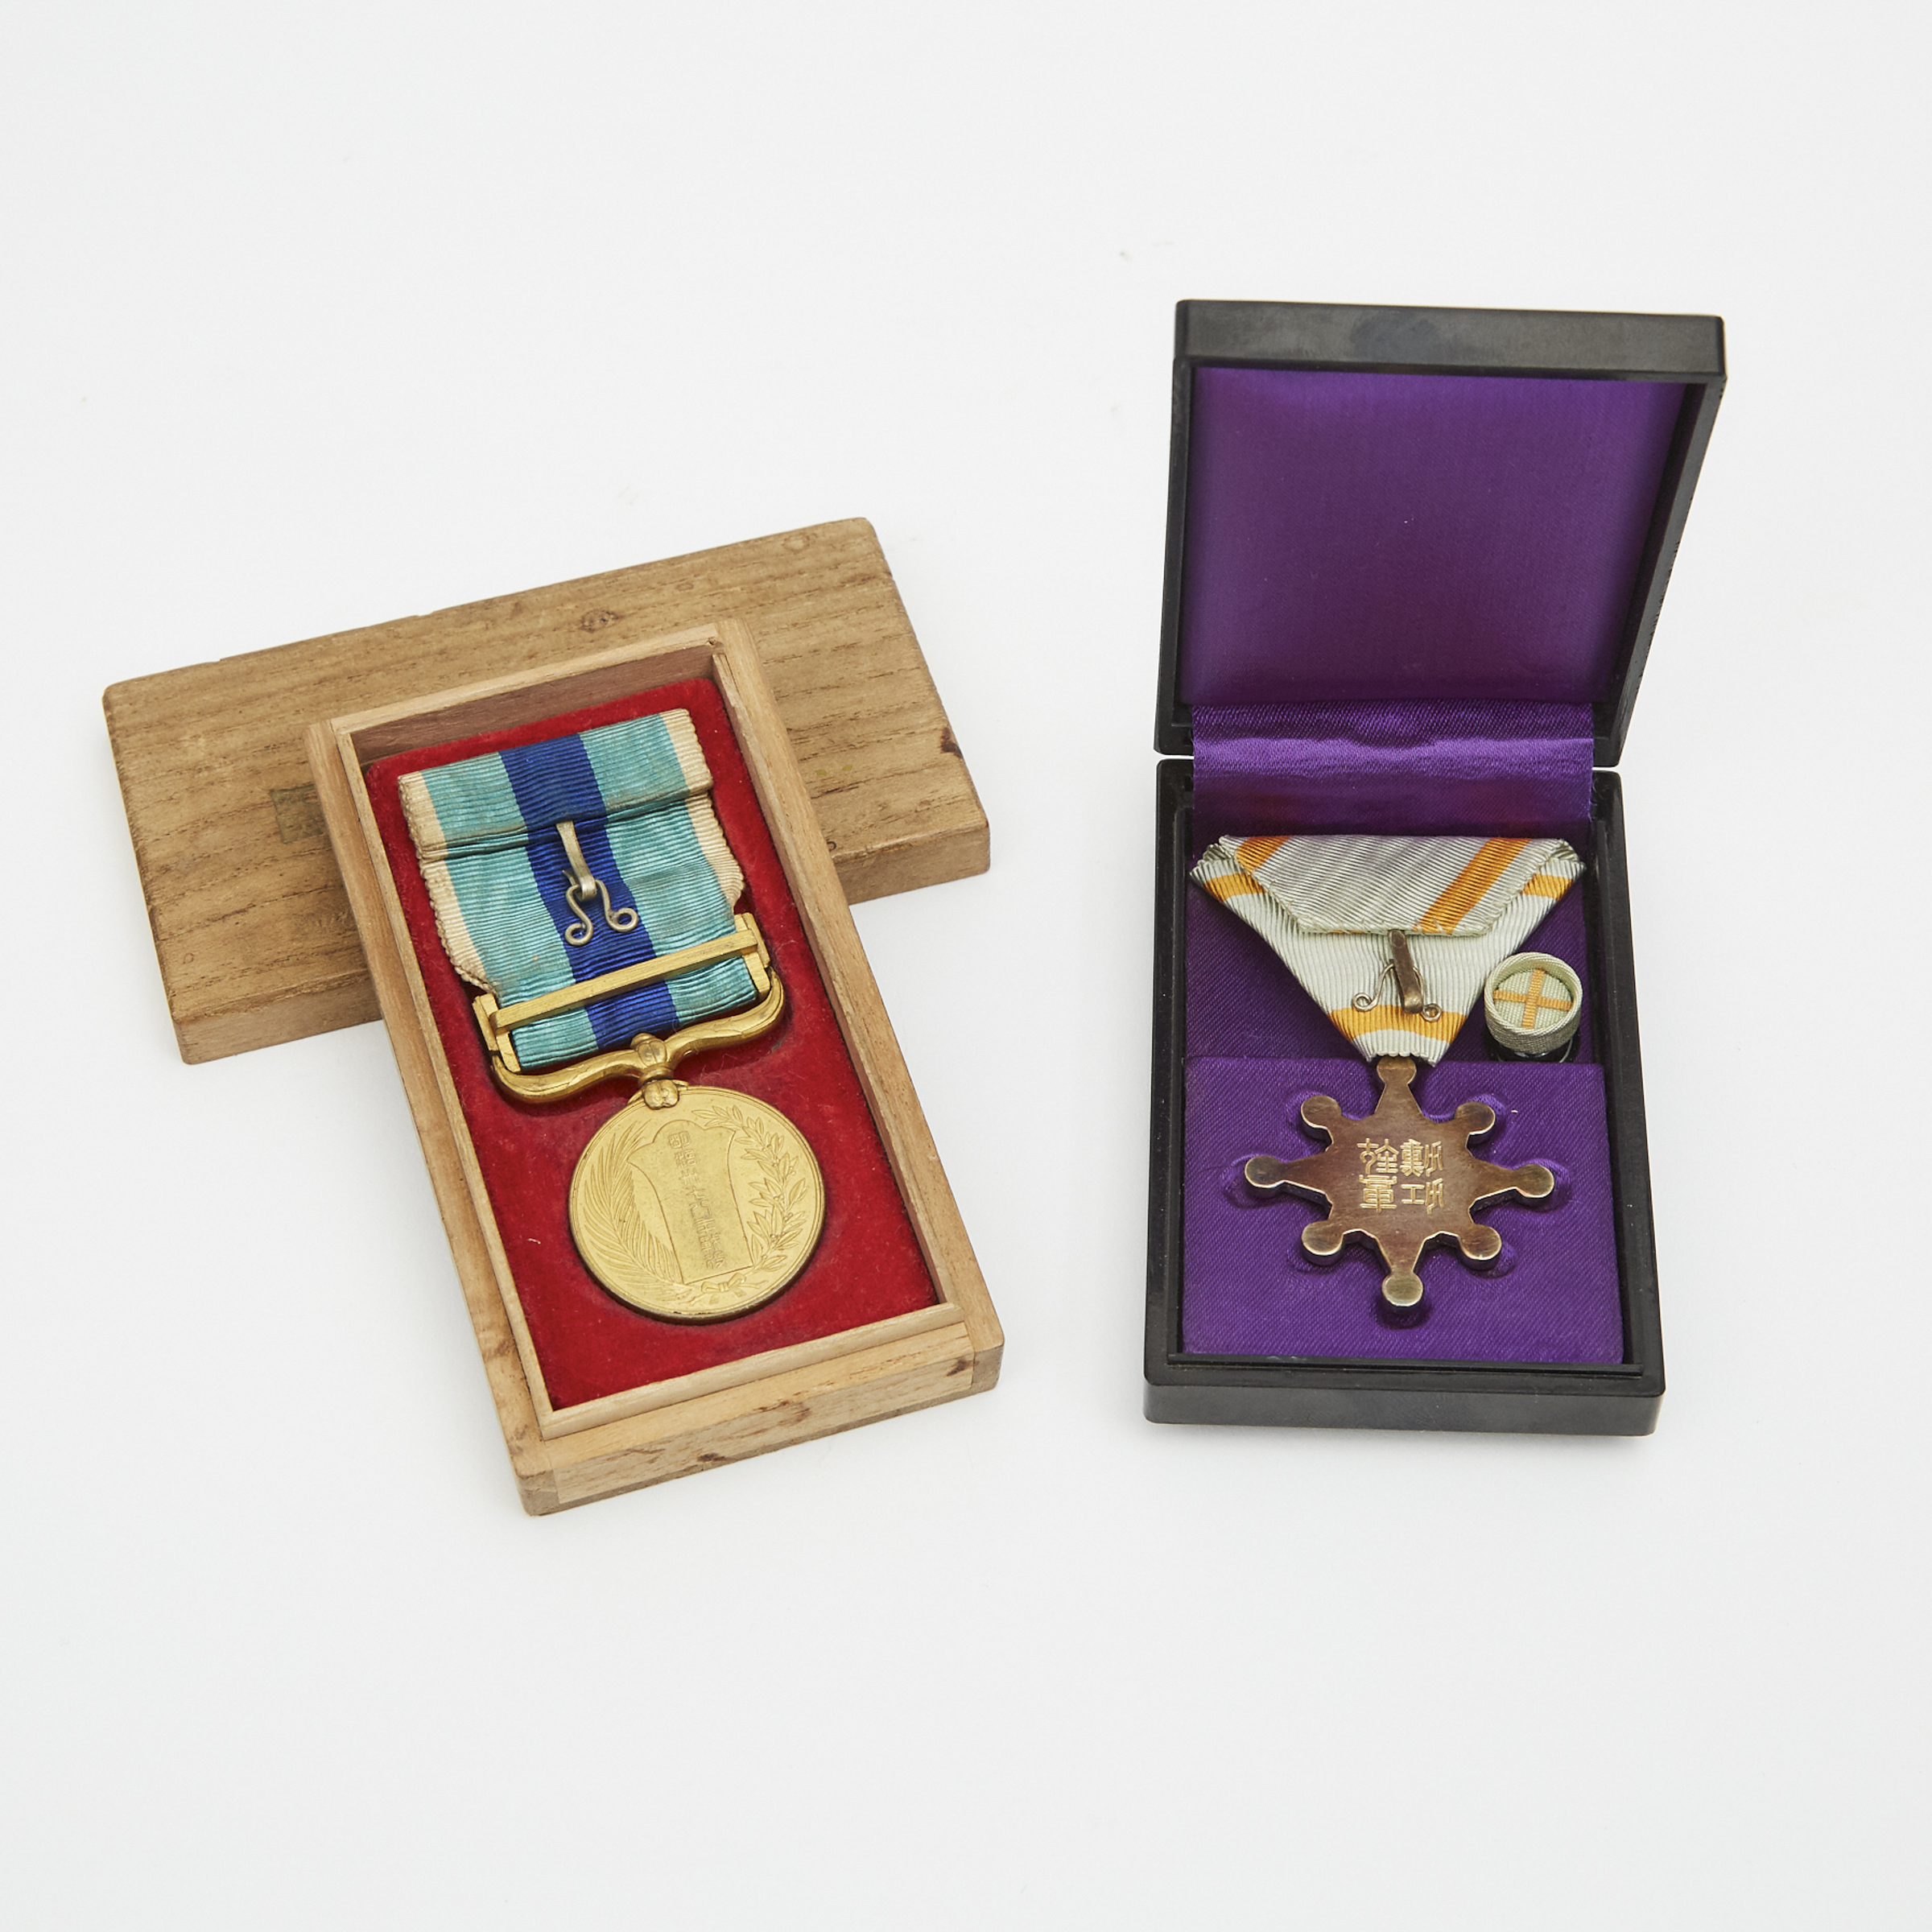 A Japanese Military Medal and an Order, Meiji Period